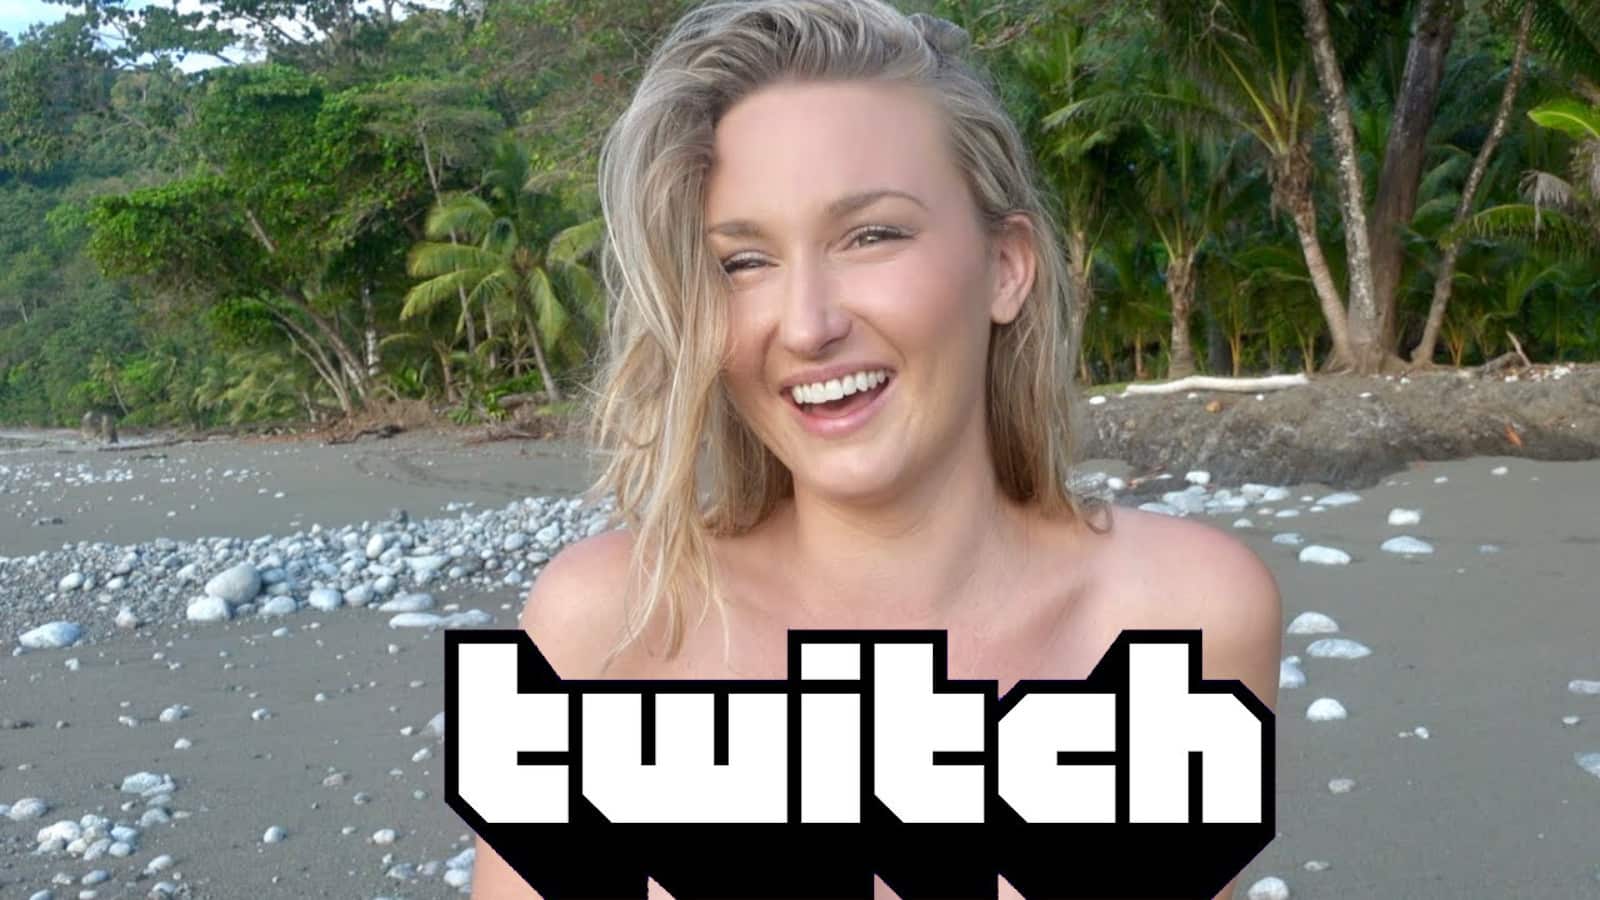 Twitch streamer banned for pixelated video